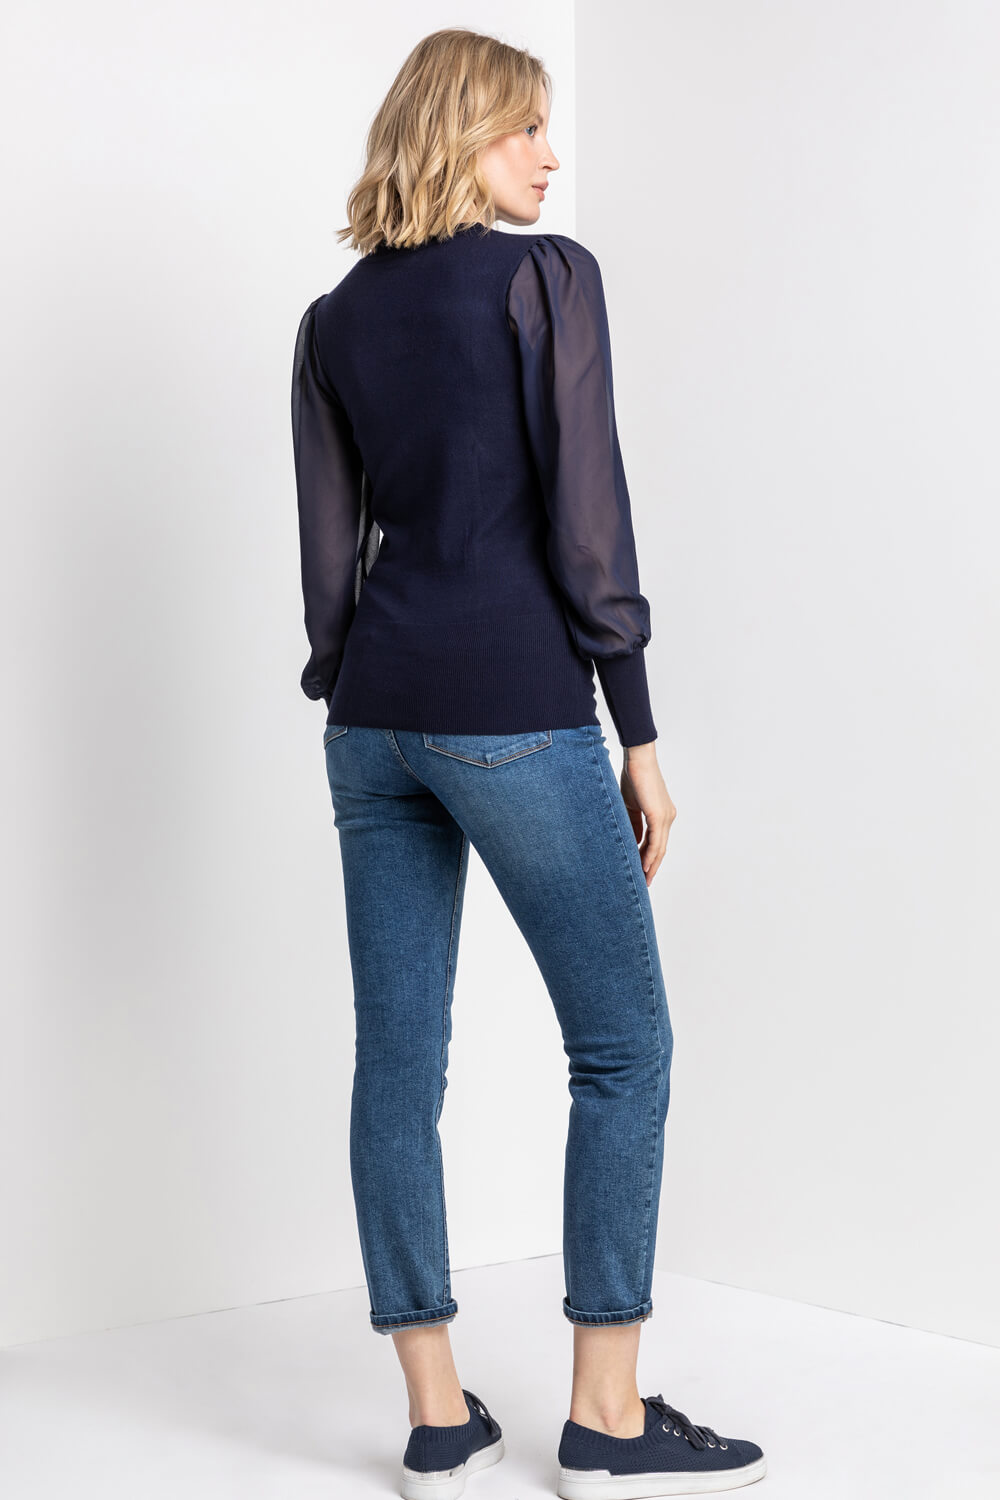 Midnight Blue Floral Embroidered Frill Neck Top, Image 2 of 5